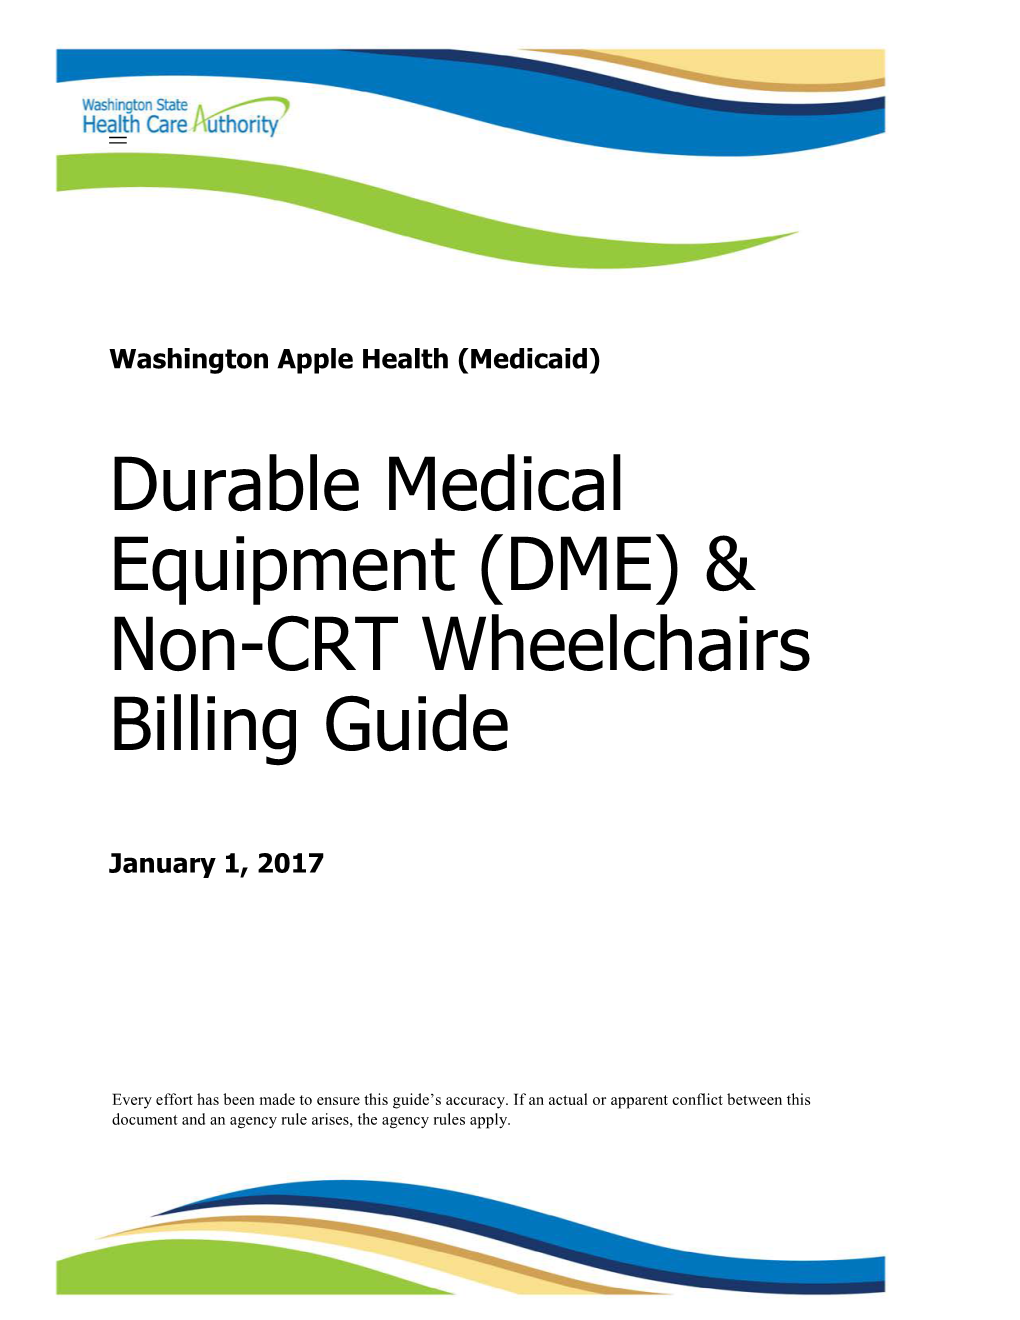 Durable Medical Equipment (DME) & Non-CRT Wheelchairs Billing Guide